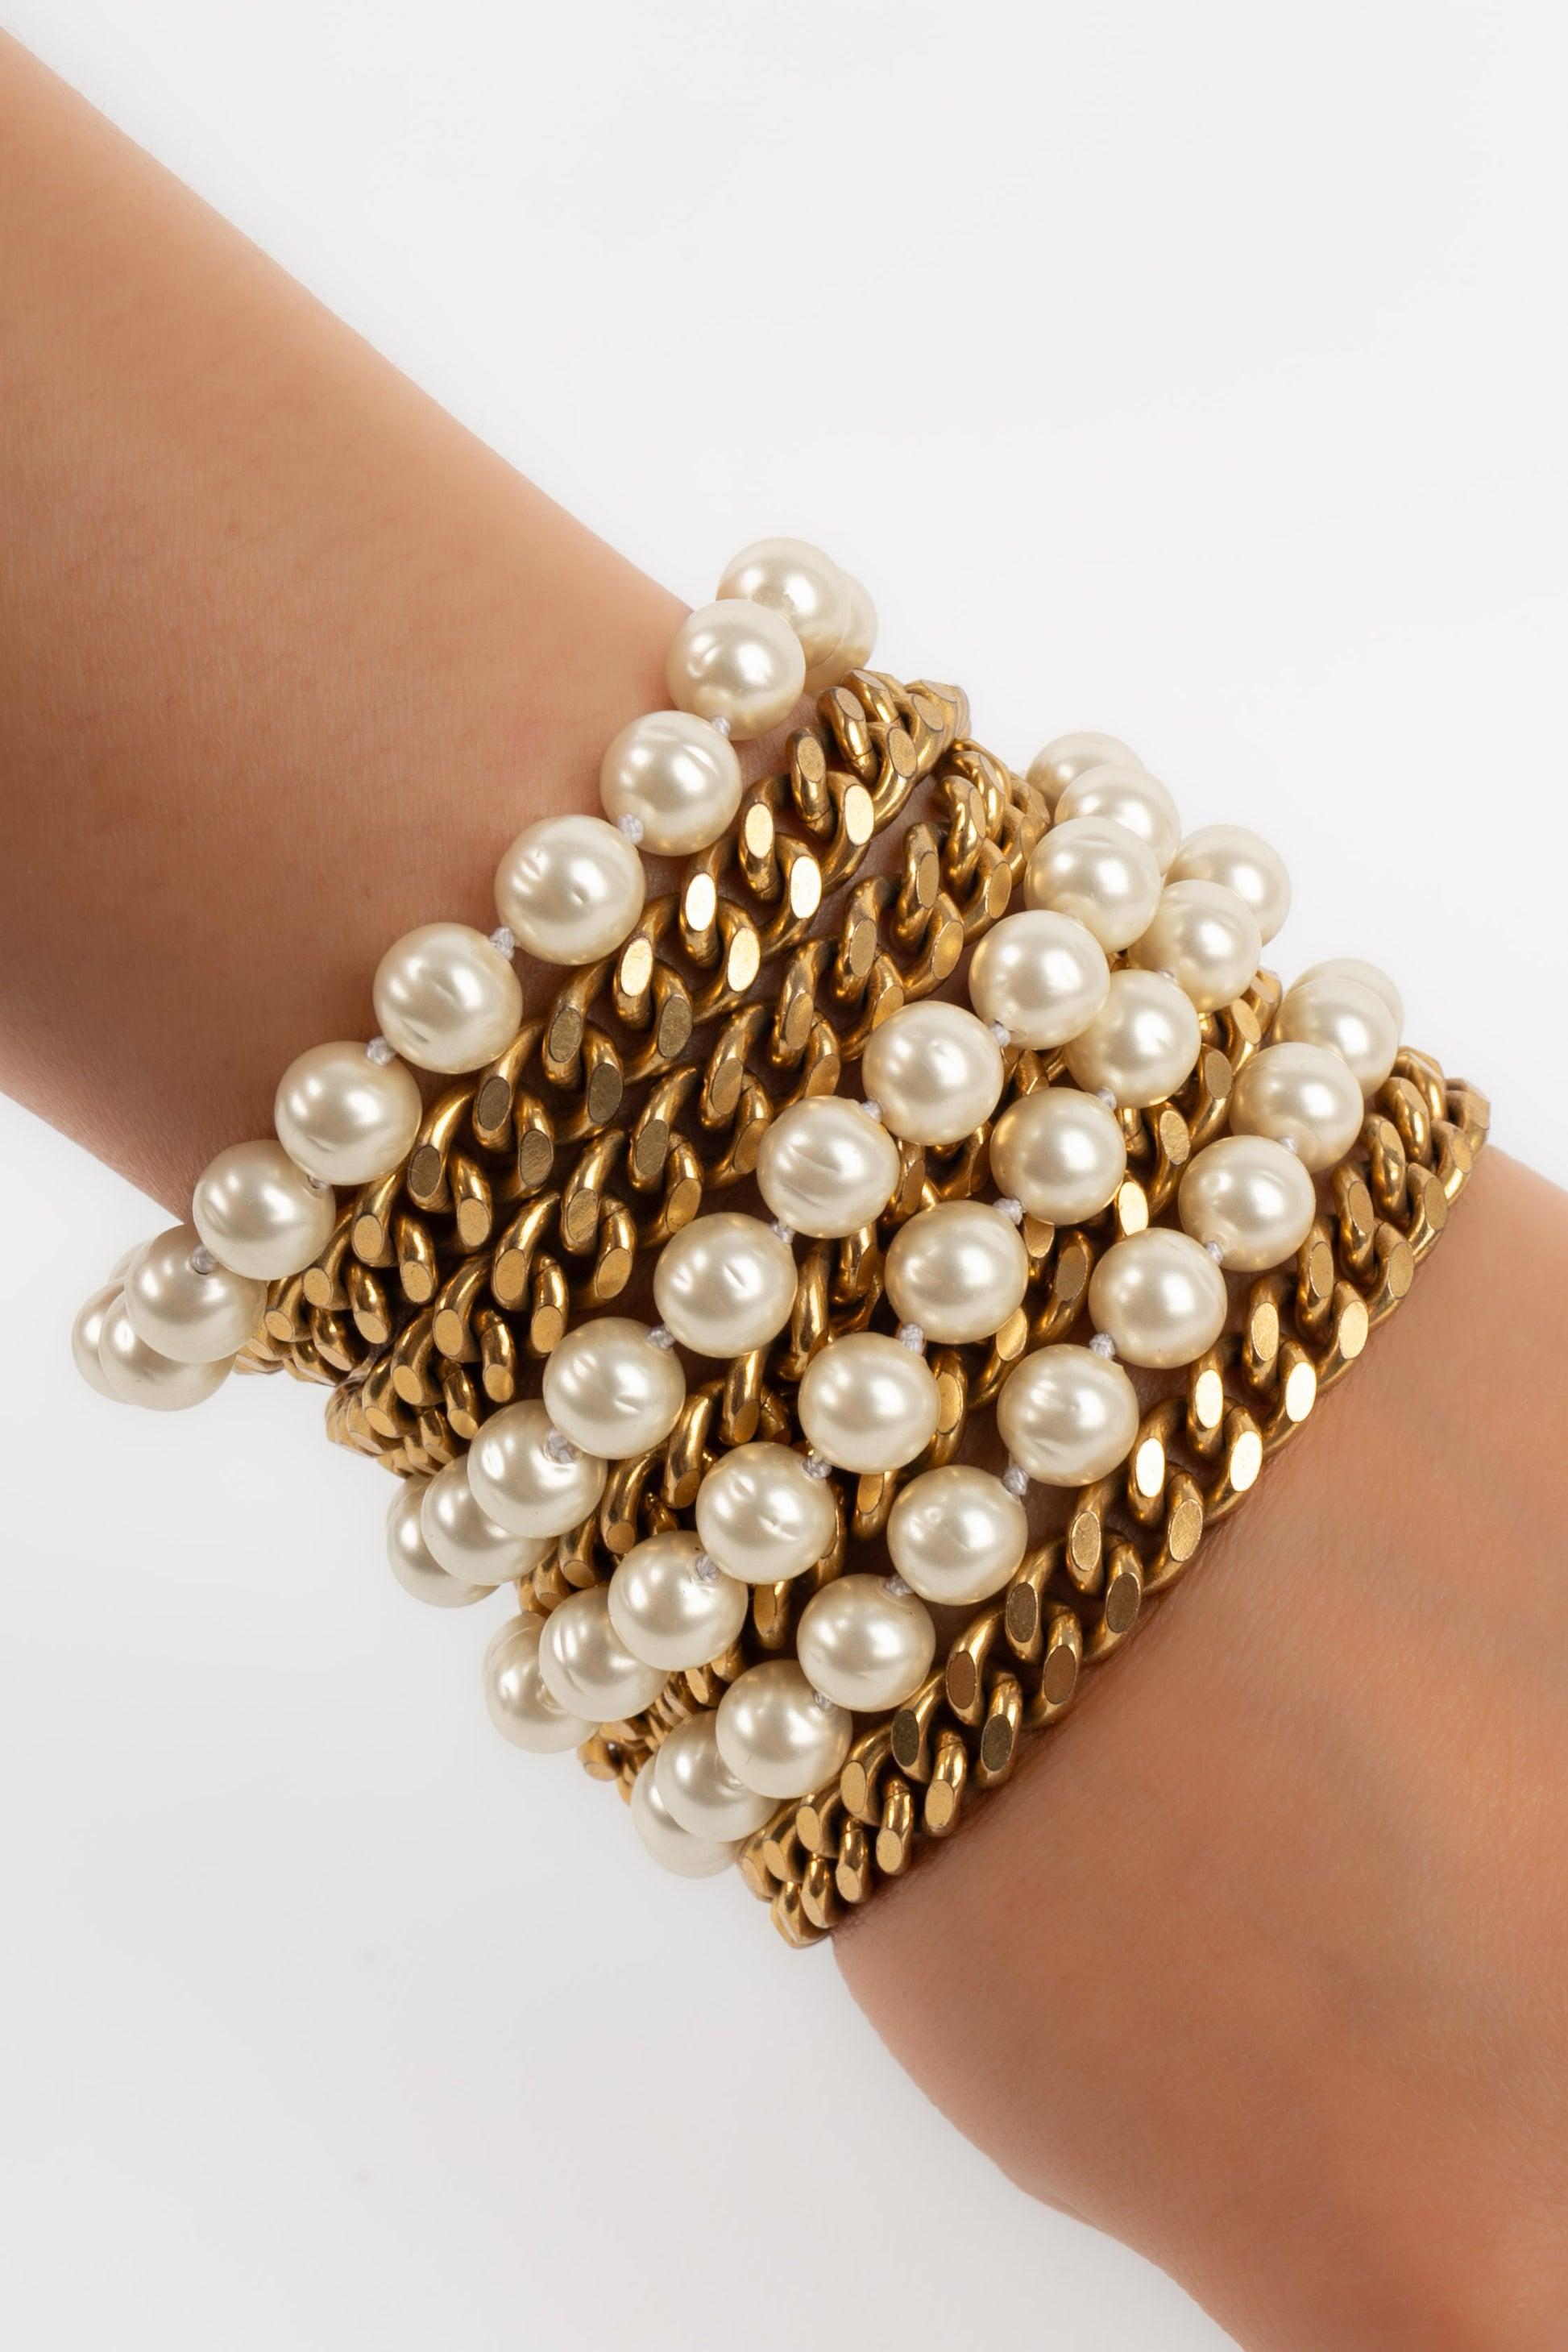 Chanel - Large golden metal bracelet with costume pearls.

Additional information:
Condition: Very good condition
Dimensions: Length: 19 cm - Width: 8 cm

Seller Reference: BRAB56
